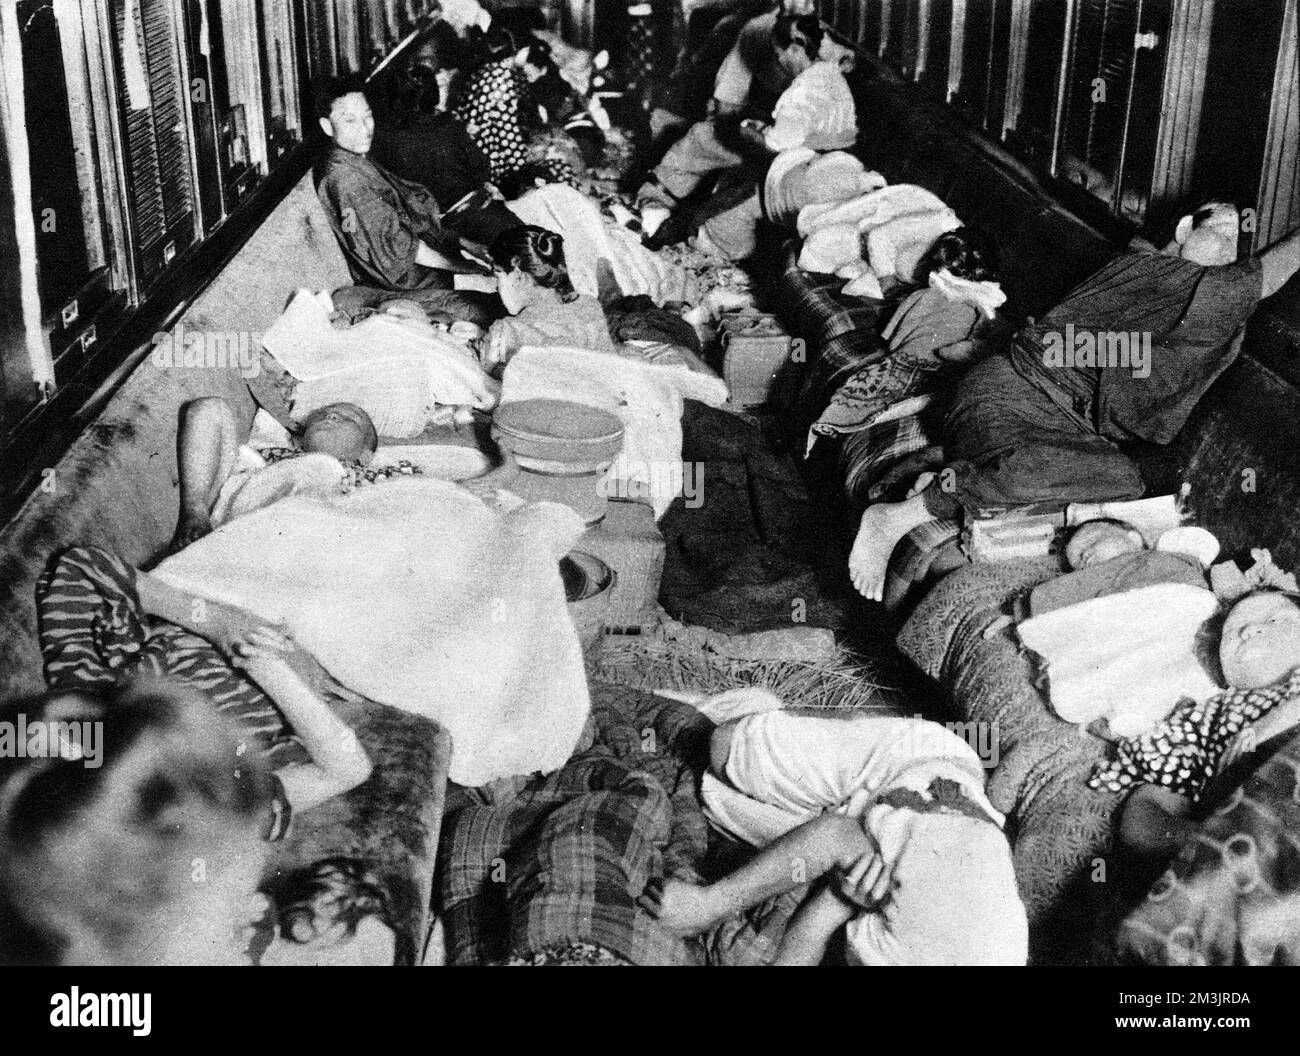 A railway shelter for the night with men, women and children huddled together in a carriage on a siding at Numadzu Station after the catastrophic earthquake that hit Tokyo and neighbouring town Yokohama in 1923. The earthquake occurred at midday on the 1st of September, at time when many people were preparing their meals. Fires spread destroying everything that the earthquake had left behind. The death toll rose to over 70000, with many more people left homeless.     Date: 1923 Stock Photo